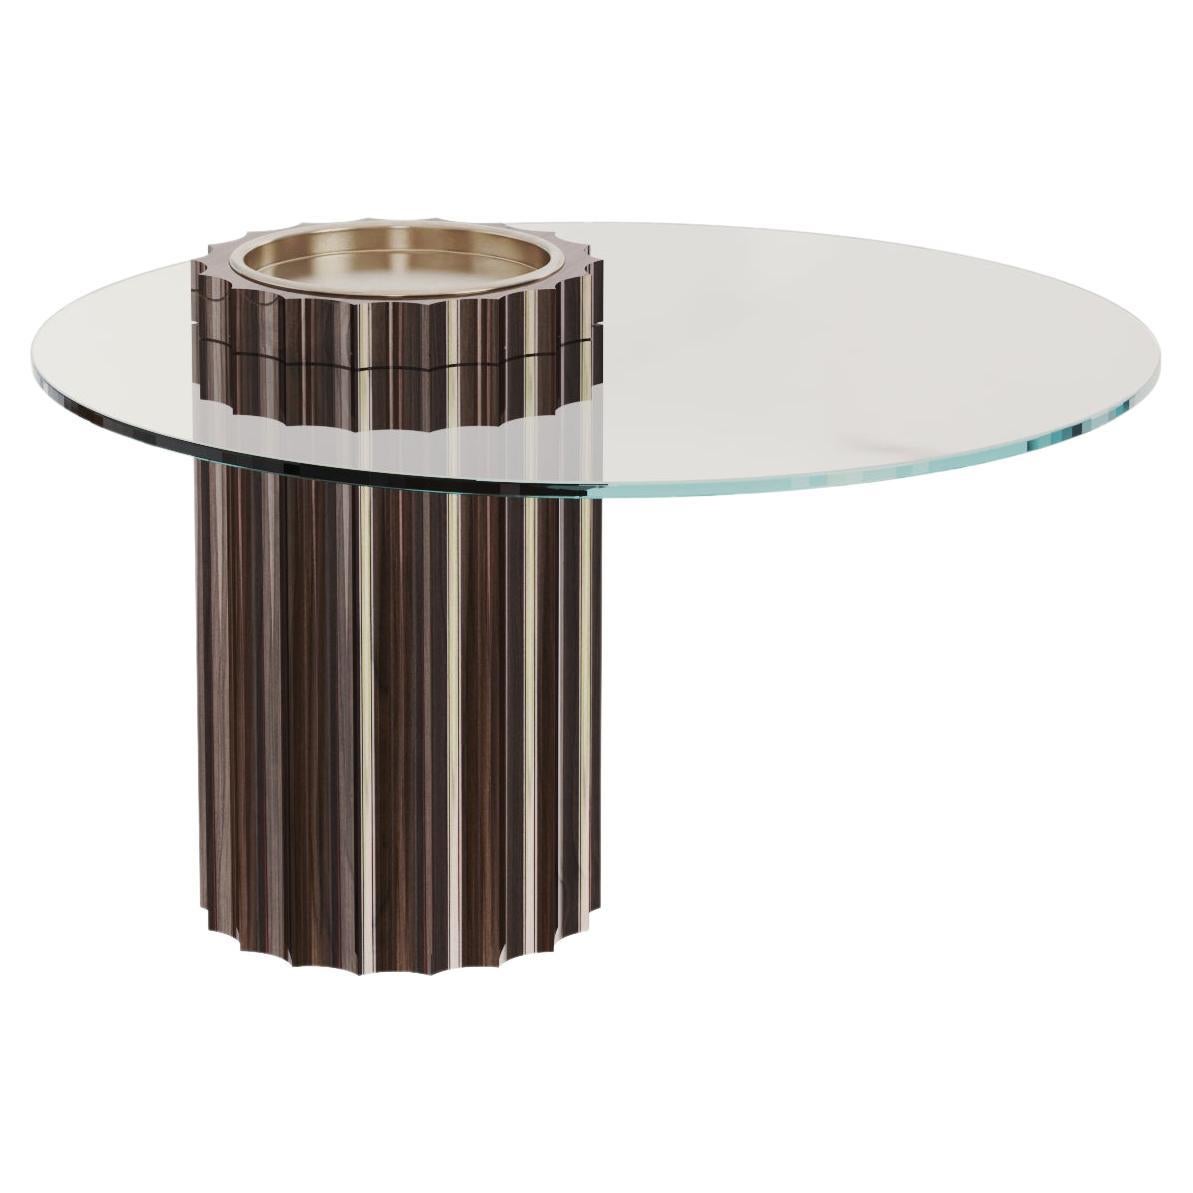 Modern Art Deco Side Table in Lacquered Dark Wood with Glass Top Ø 70cm